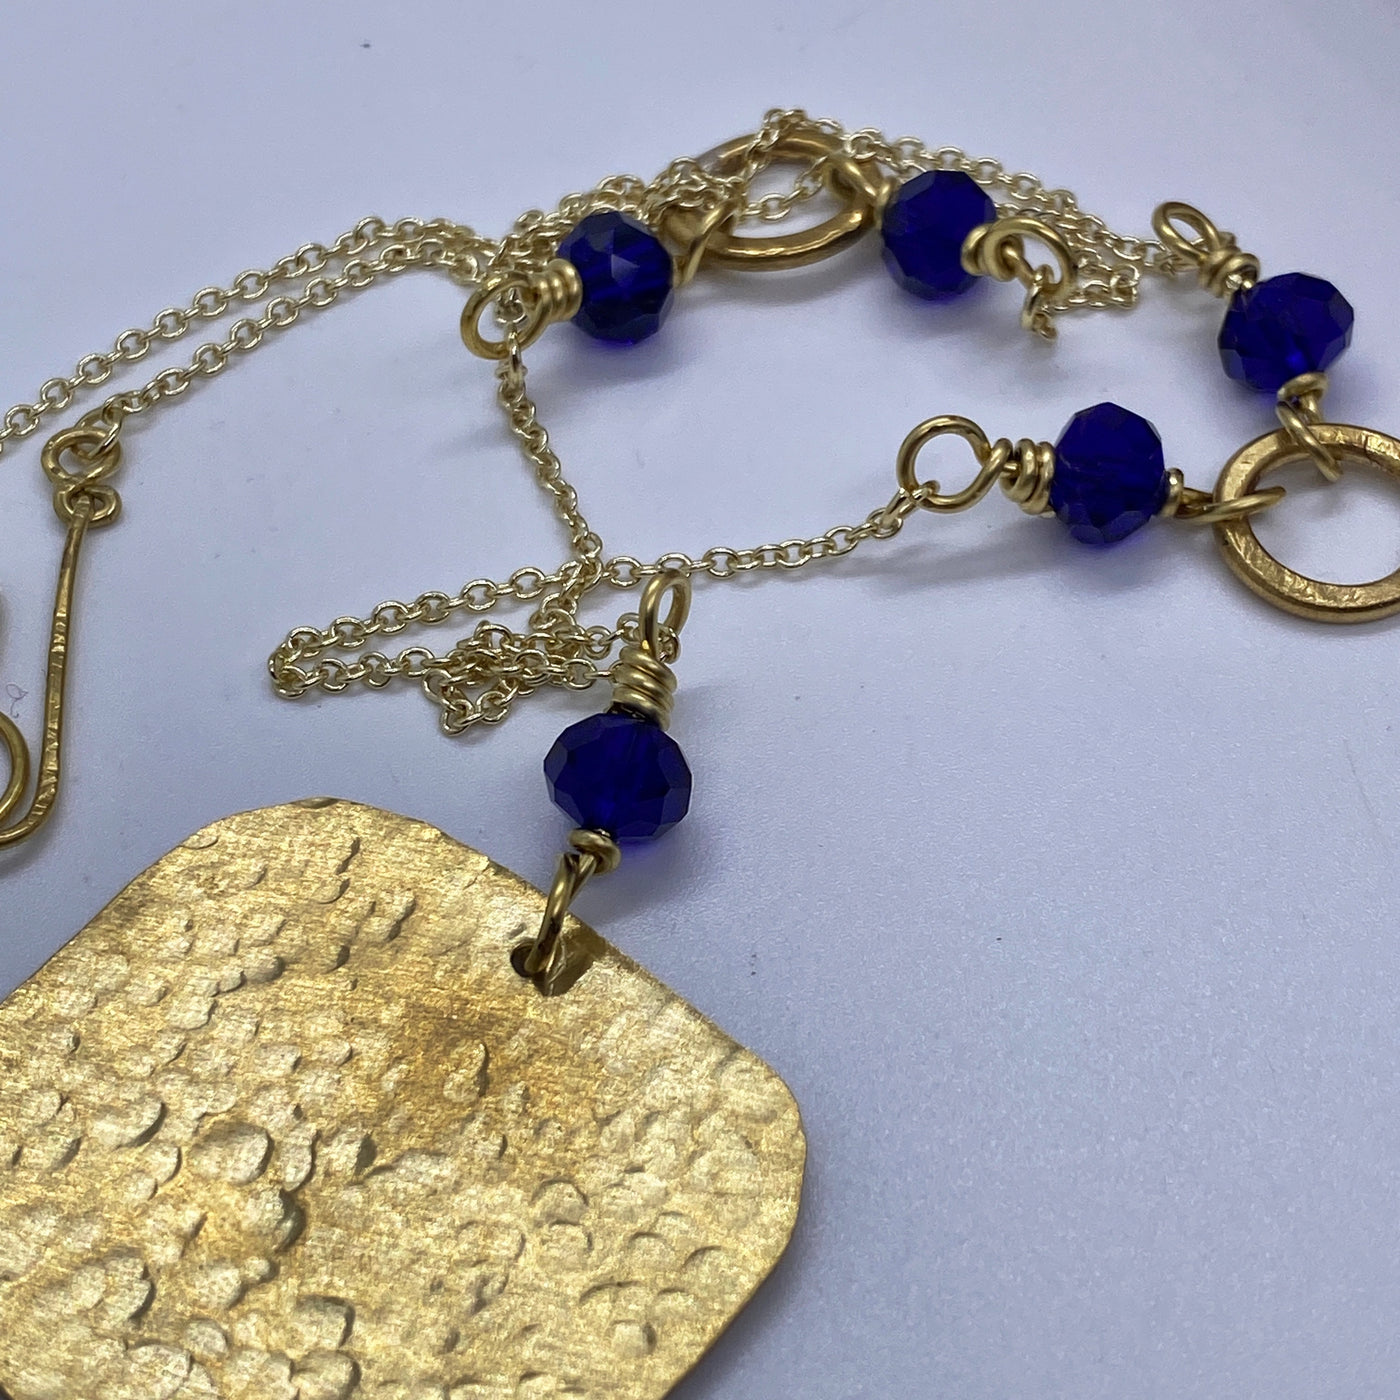 Brass and blue crystal rondelles necklace with hammered pendant